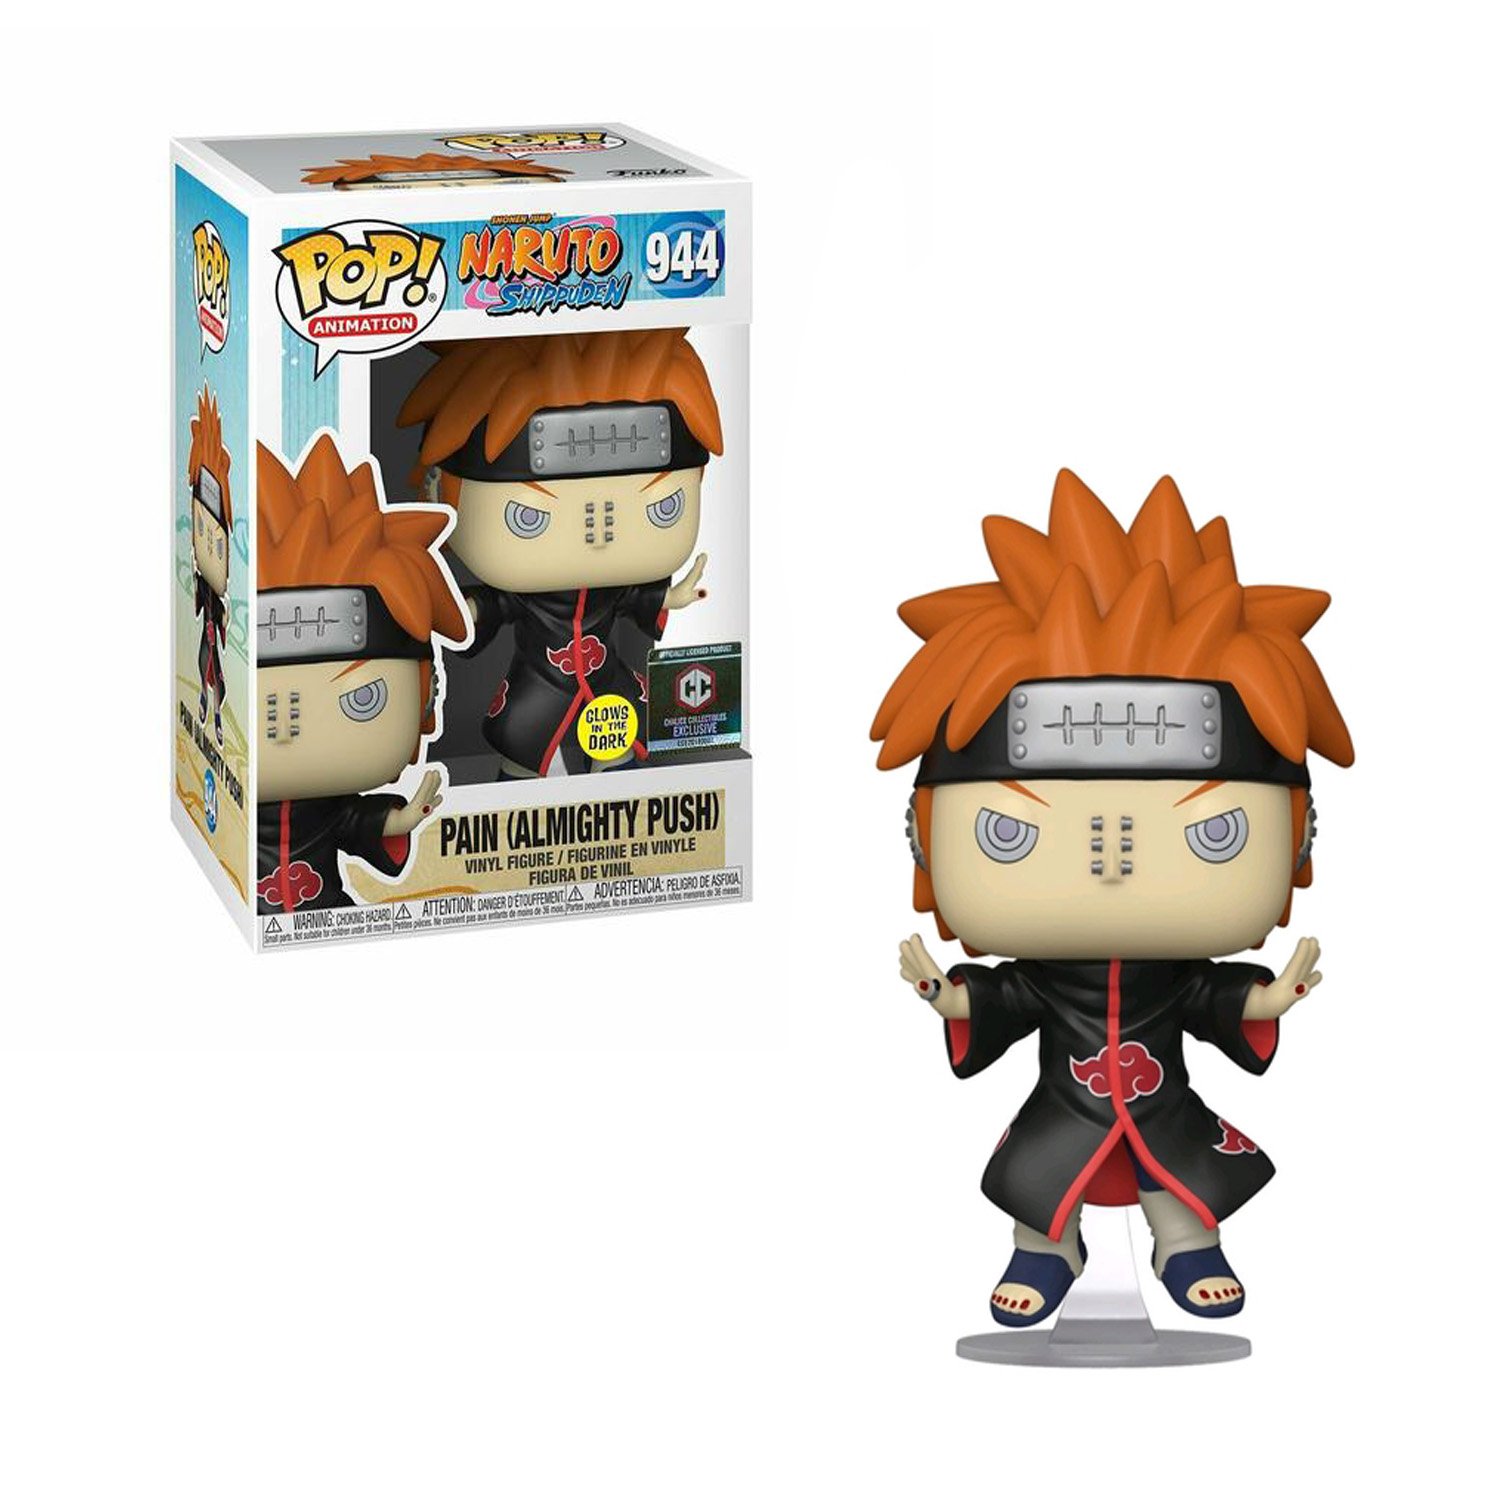 Pain (Almighty Push) Glows In The Dark, Chalice Exclusive Figure Naruto Funko Pop Animation 3.75 Inches Funko Pop 944